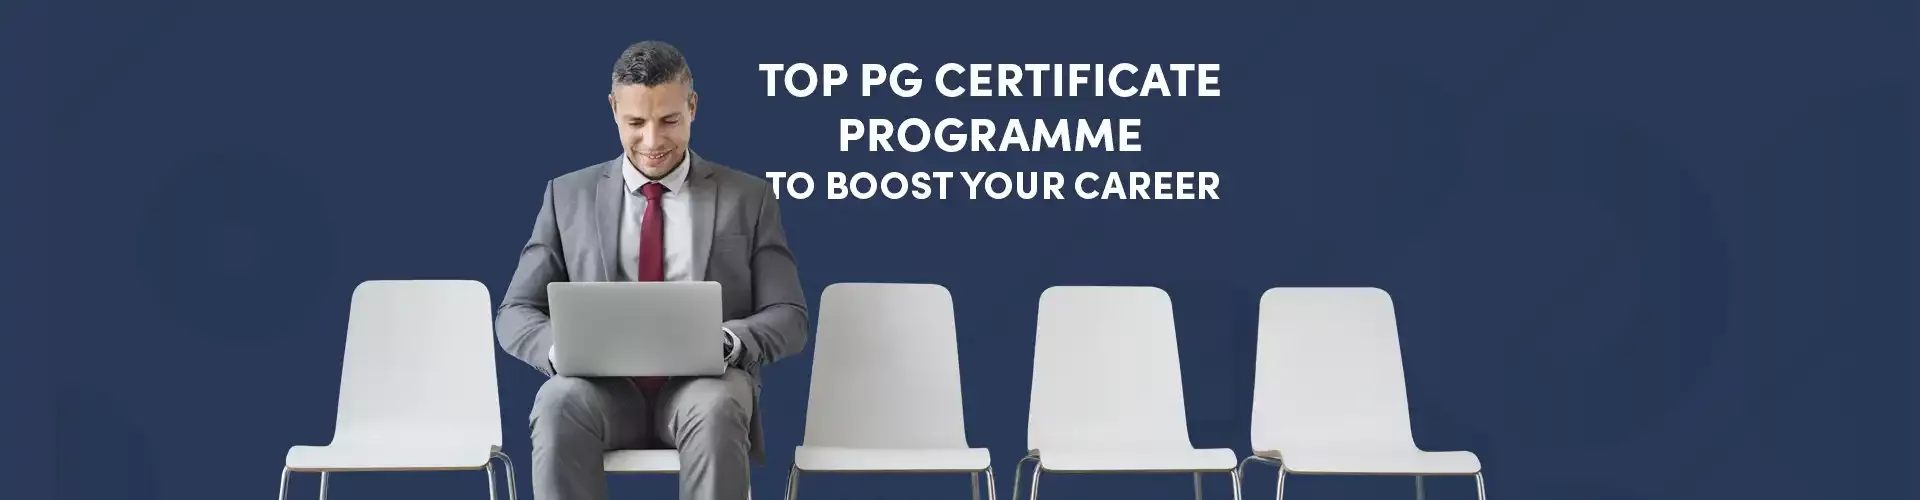 Top PG Certificate Programme to Boost Your Career